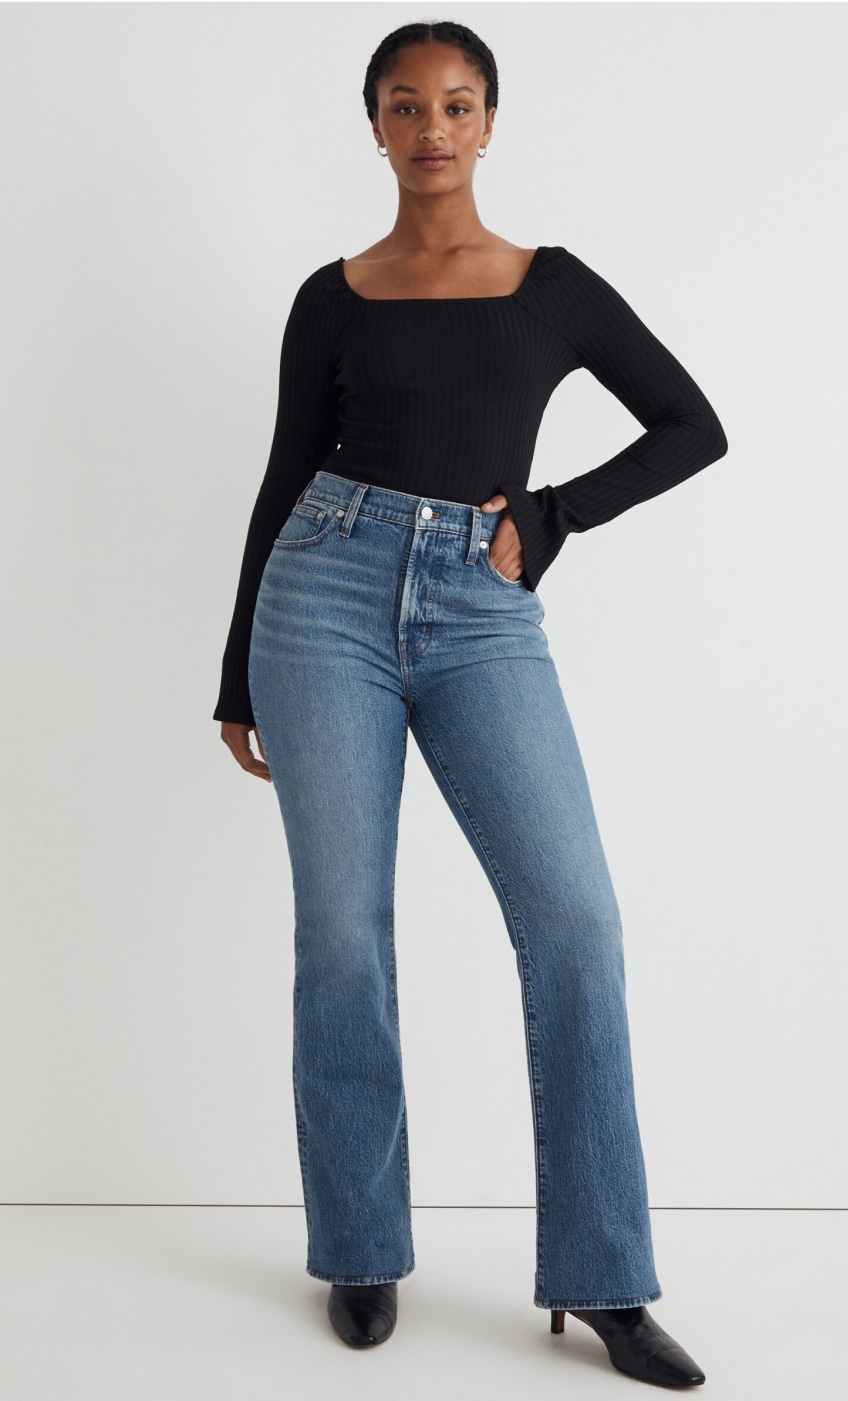 The Perfect Vintage Flare Jean